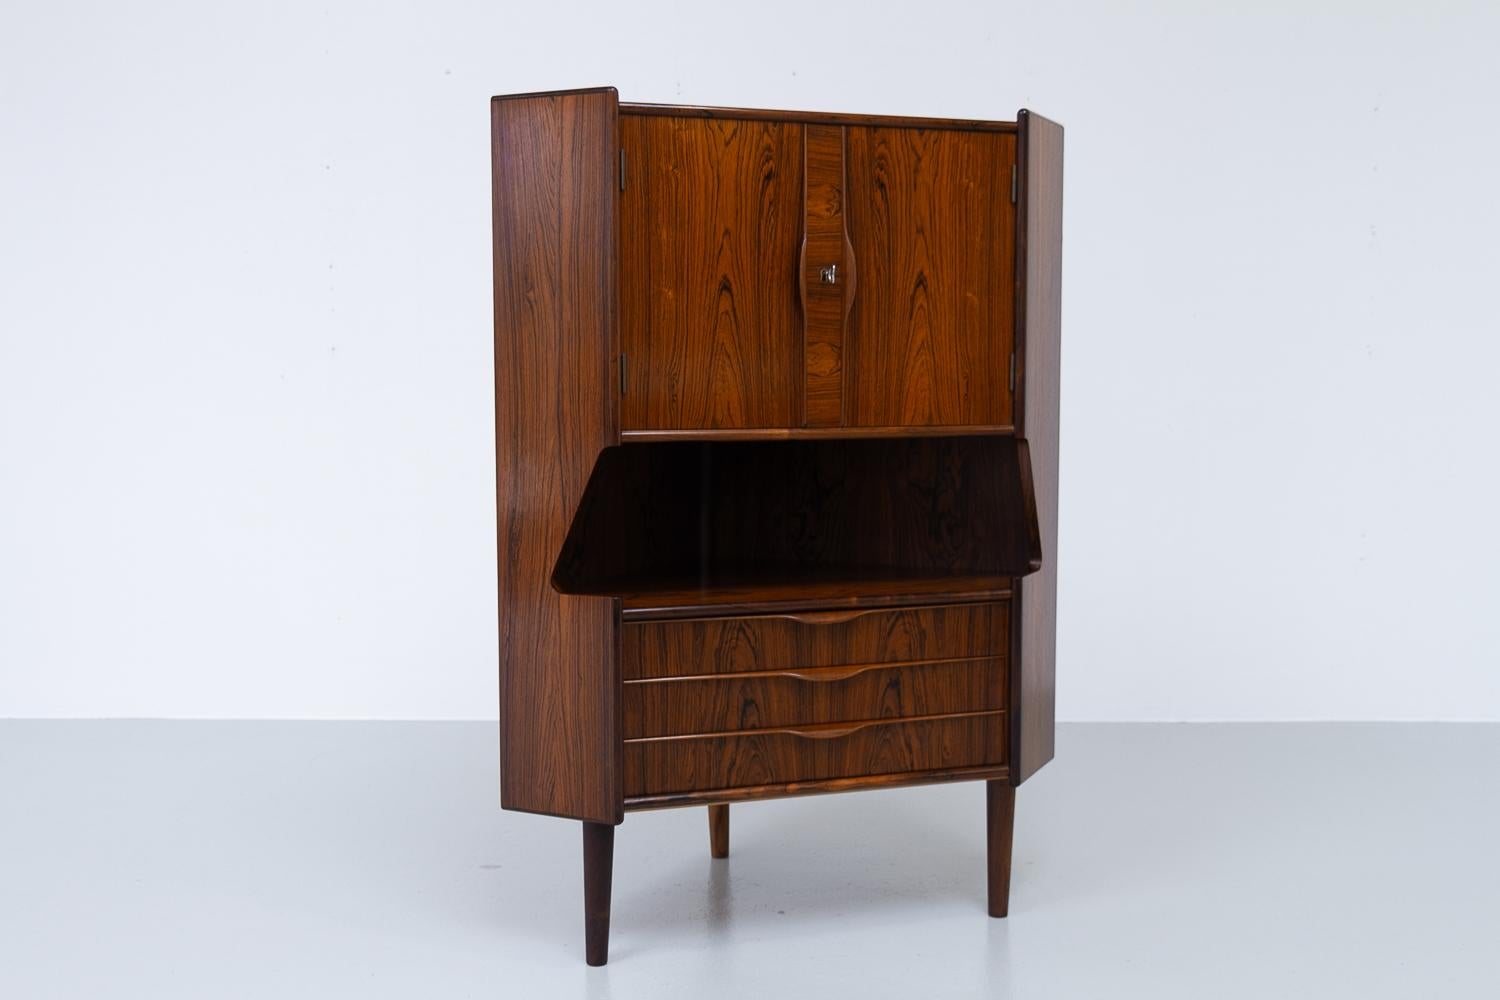 Vintage Danish rosewood corner cabinet with dry bar, 1960s.

Scandinavian Mid-Century Modern corner cabinet with bar unit and drawers. Drinks cabinet behind double doors with lock and key. Inside is decorated mirror and curved shelf. Amble space for